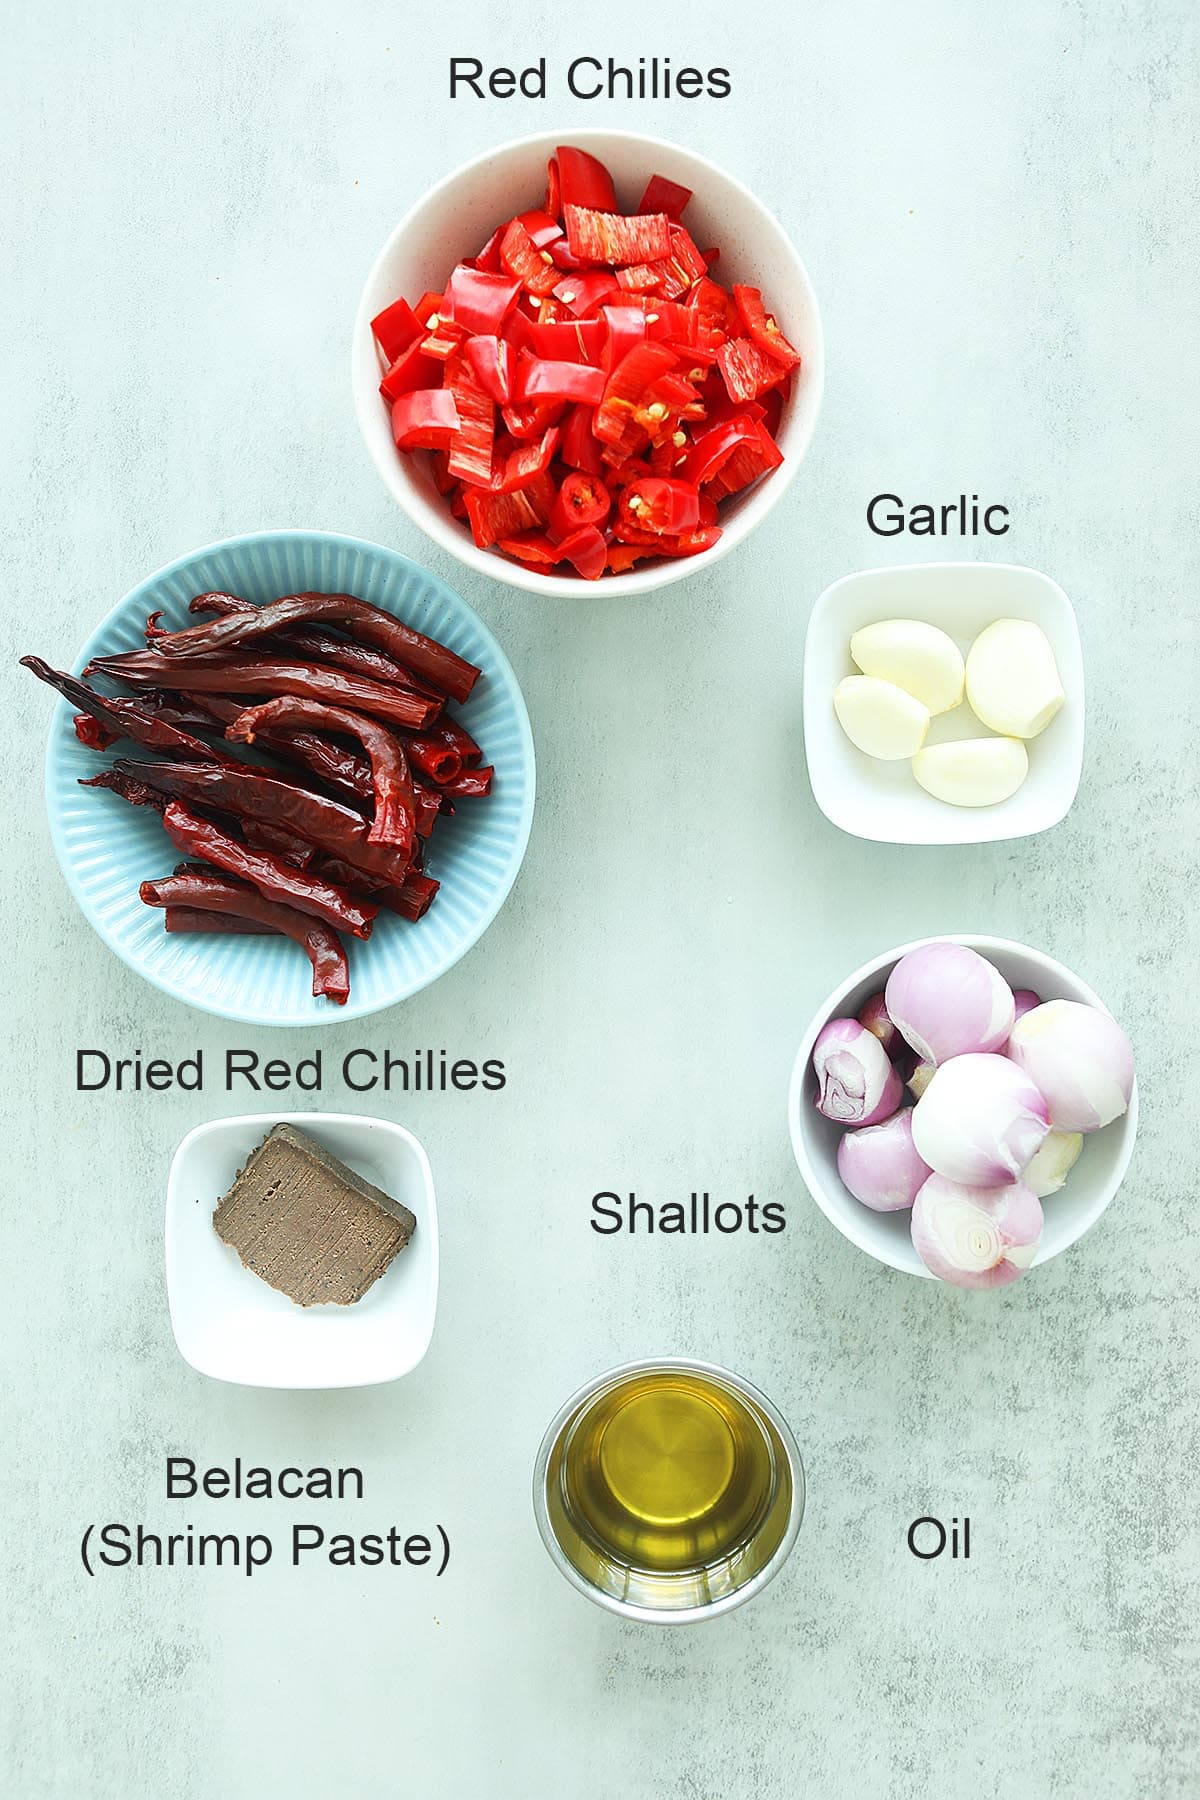 Ingredients for sambal includes fresh red chilies, dried red chilies, garlic, shallots and belacan. 